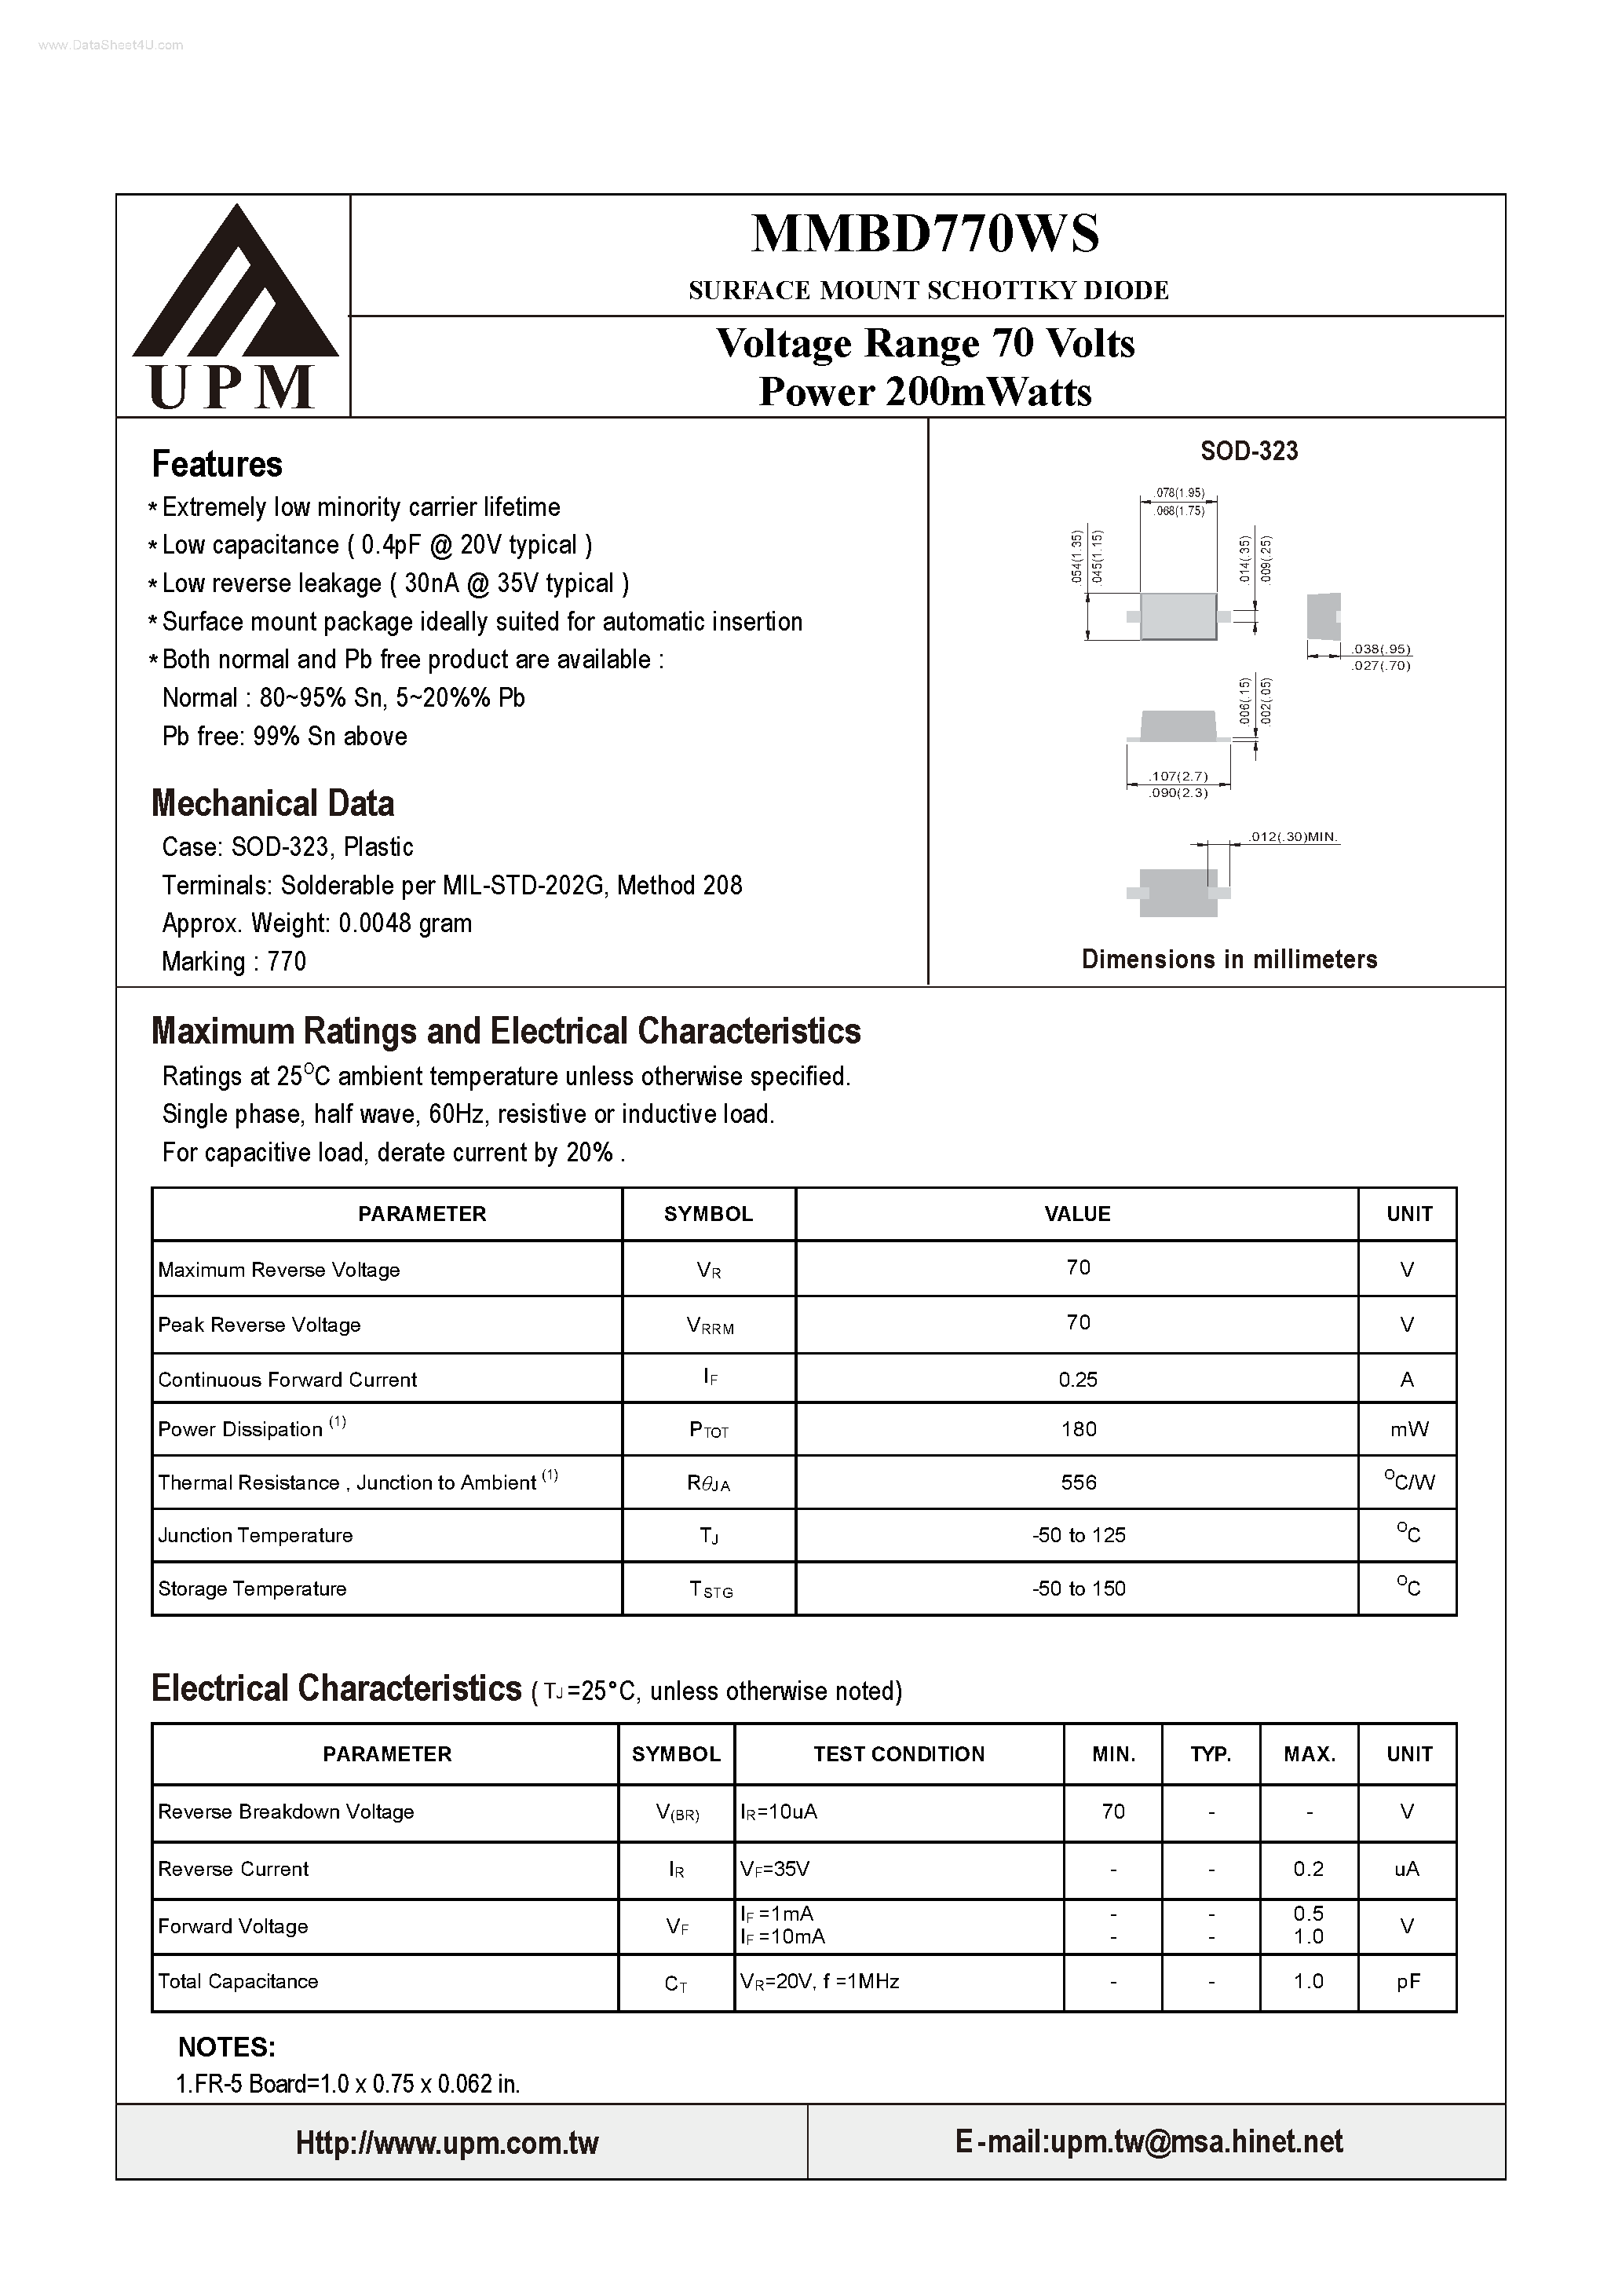 Datasheet MMBD770WS - SURFACE MOUNT SCHOTTKY DIODE page 1